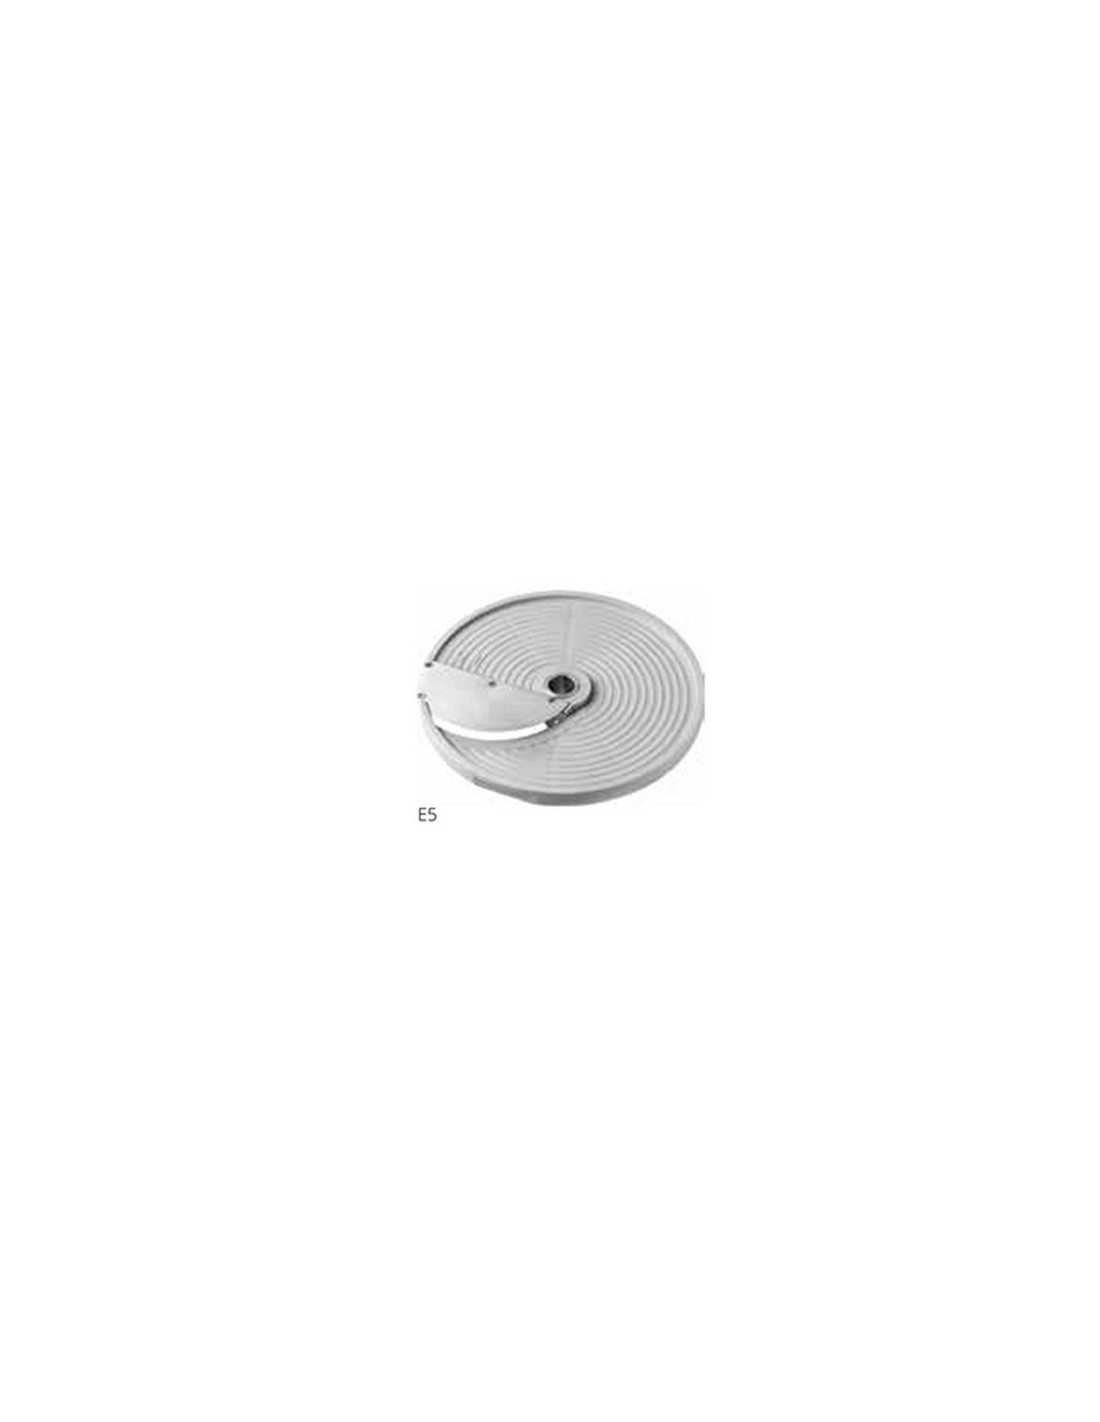 Disc for slicing tomatoes, lemons, oranges, apples, pineapples, grapefruits. - Thickness 5 mm